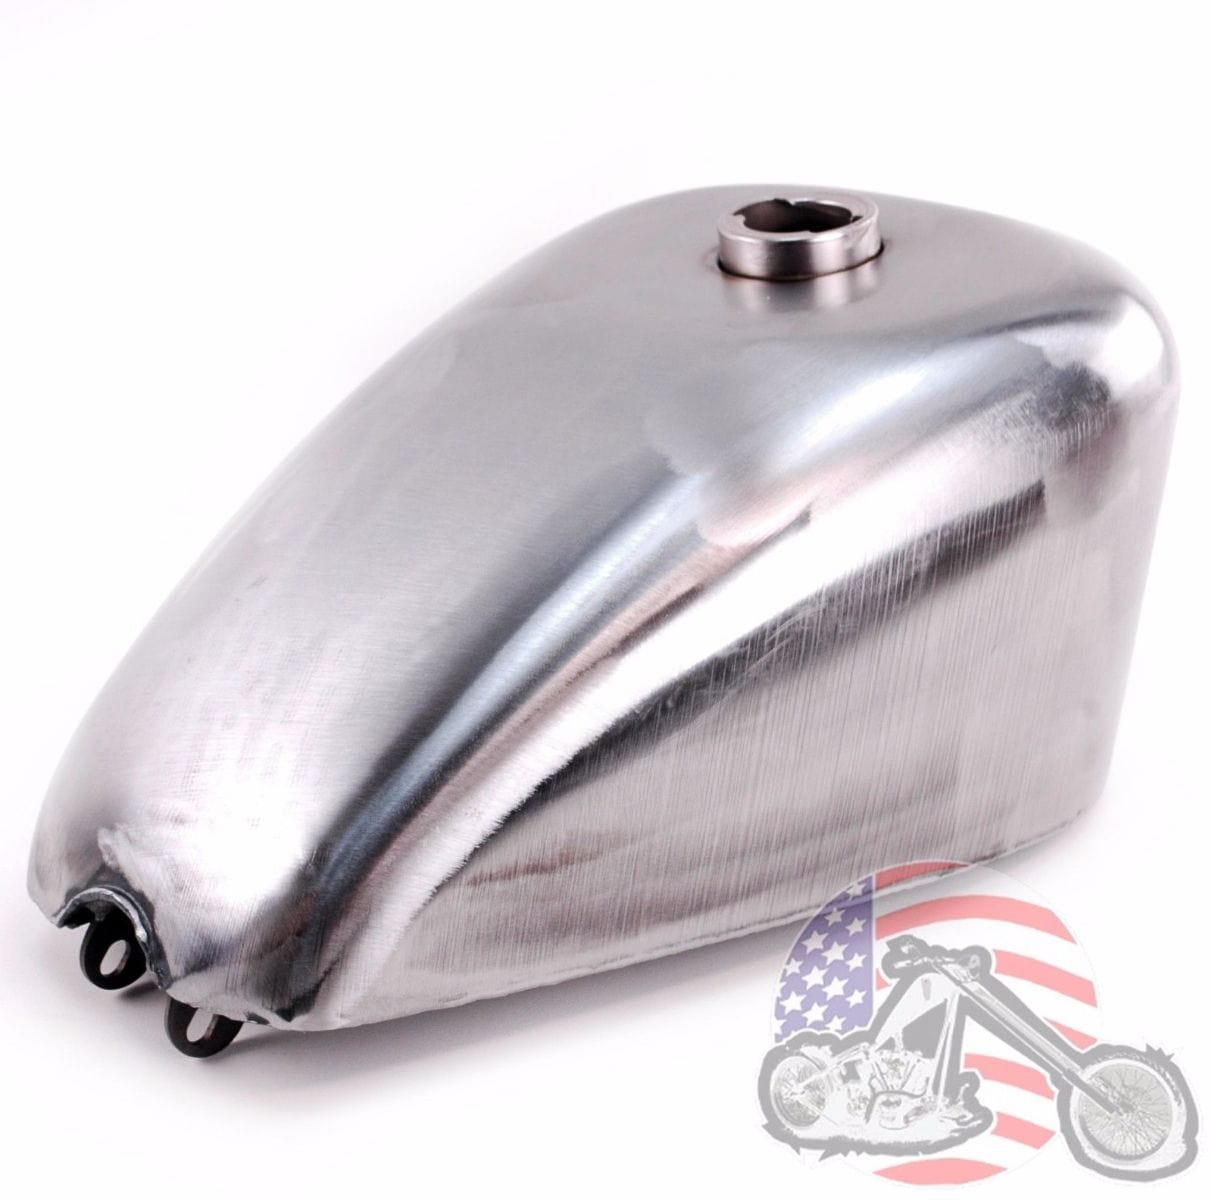 4.5 GALLON REPLACEMENT FUEL GAS TANK EFI INJECTED INJECTION HARLEY XL  SPORTSTER